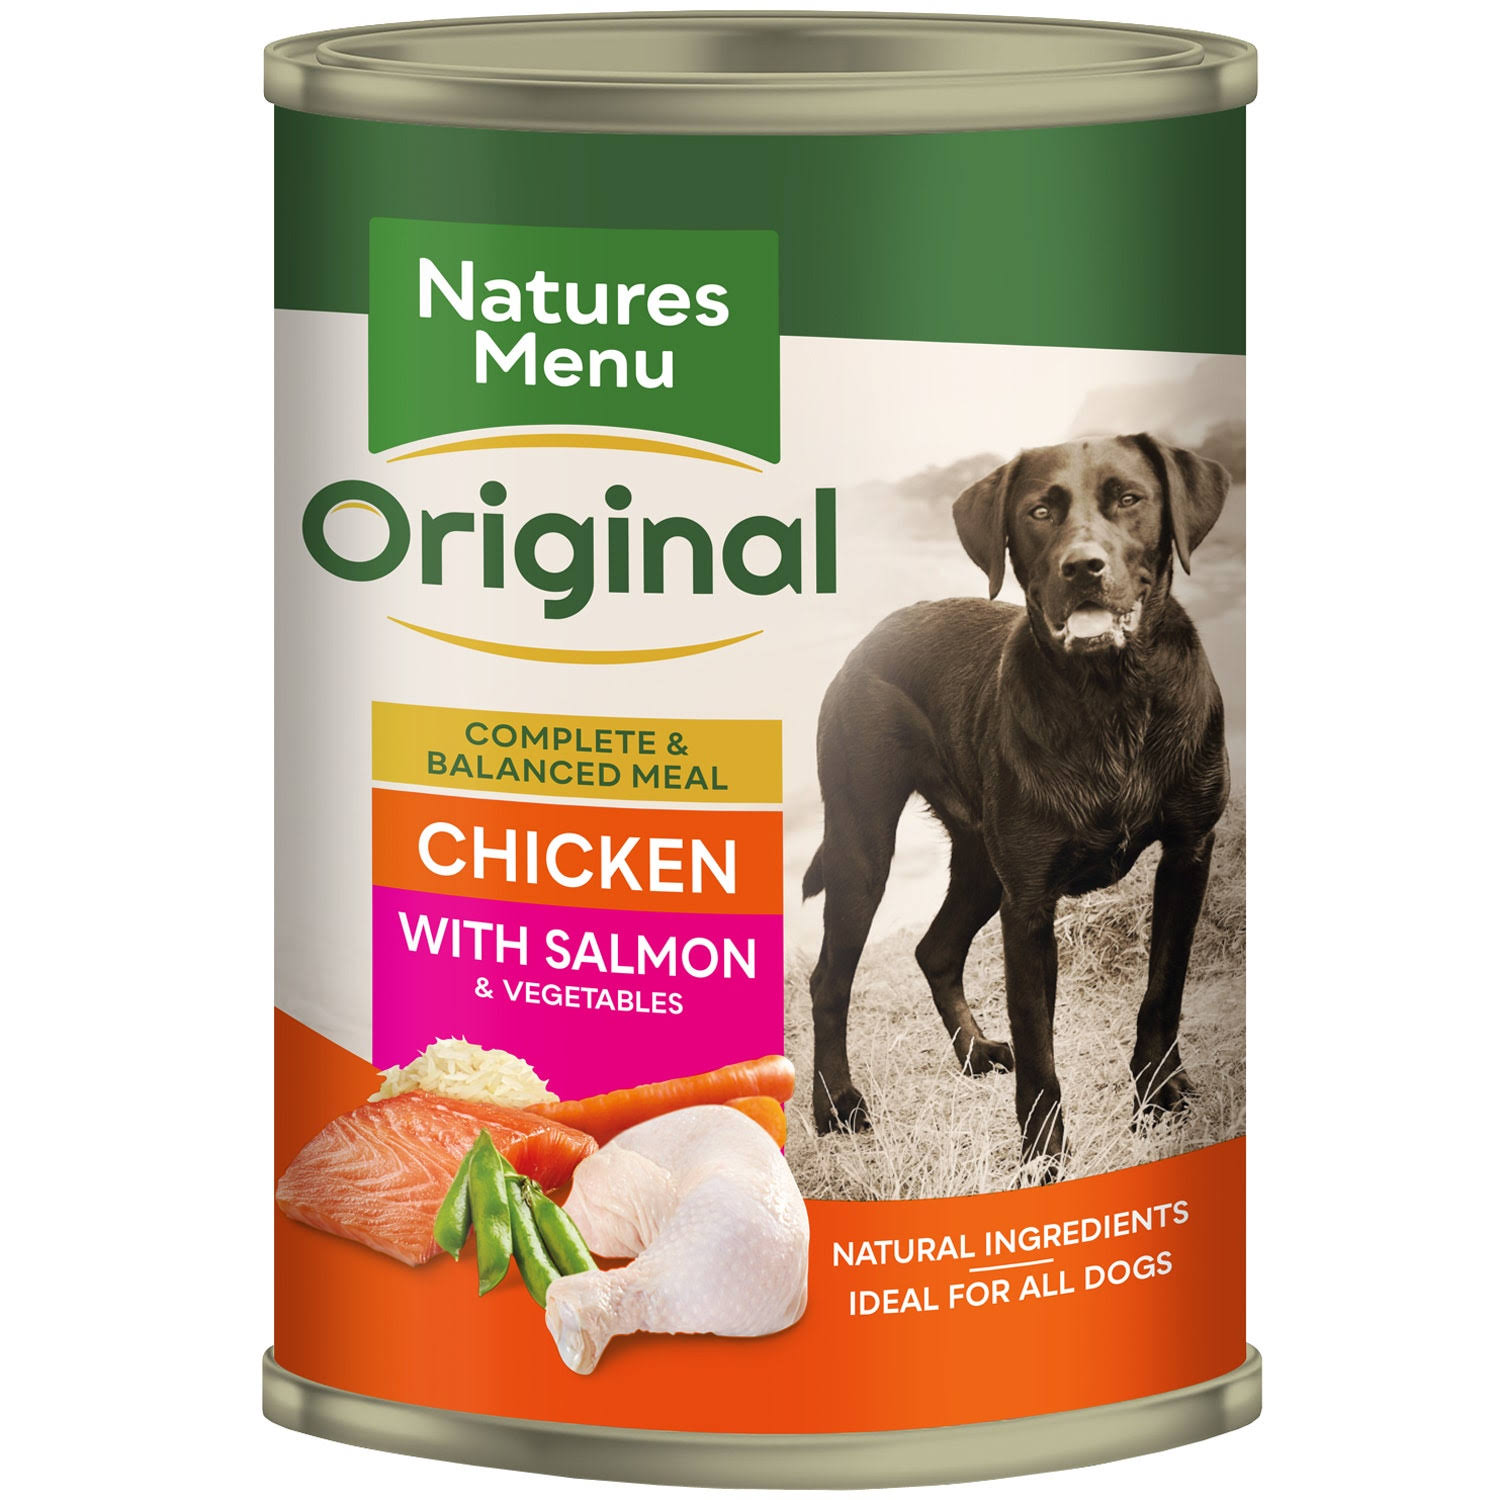 Natures Menu Chicken with Salmon Dog Food Cans - 12 x 400g